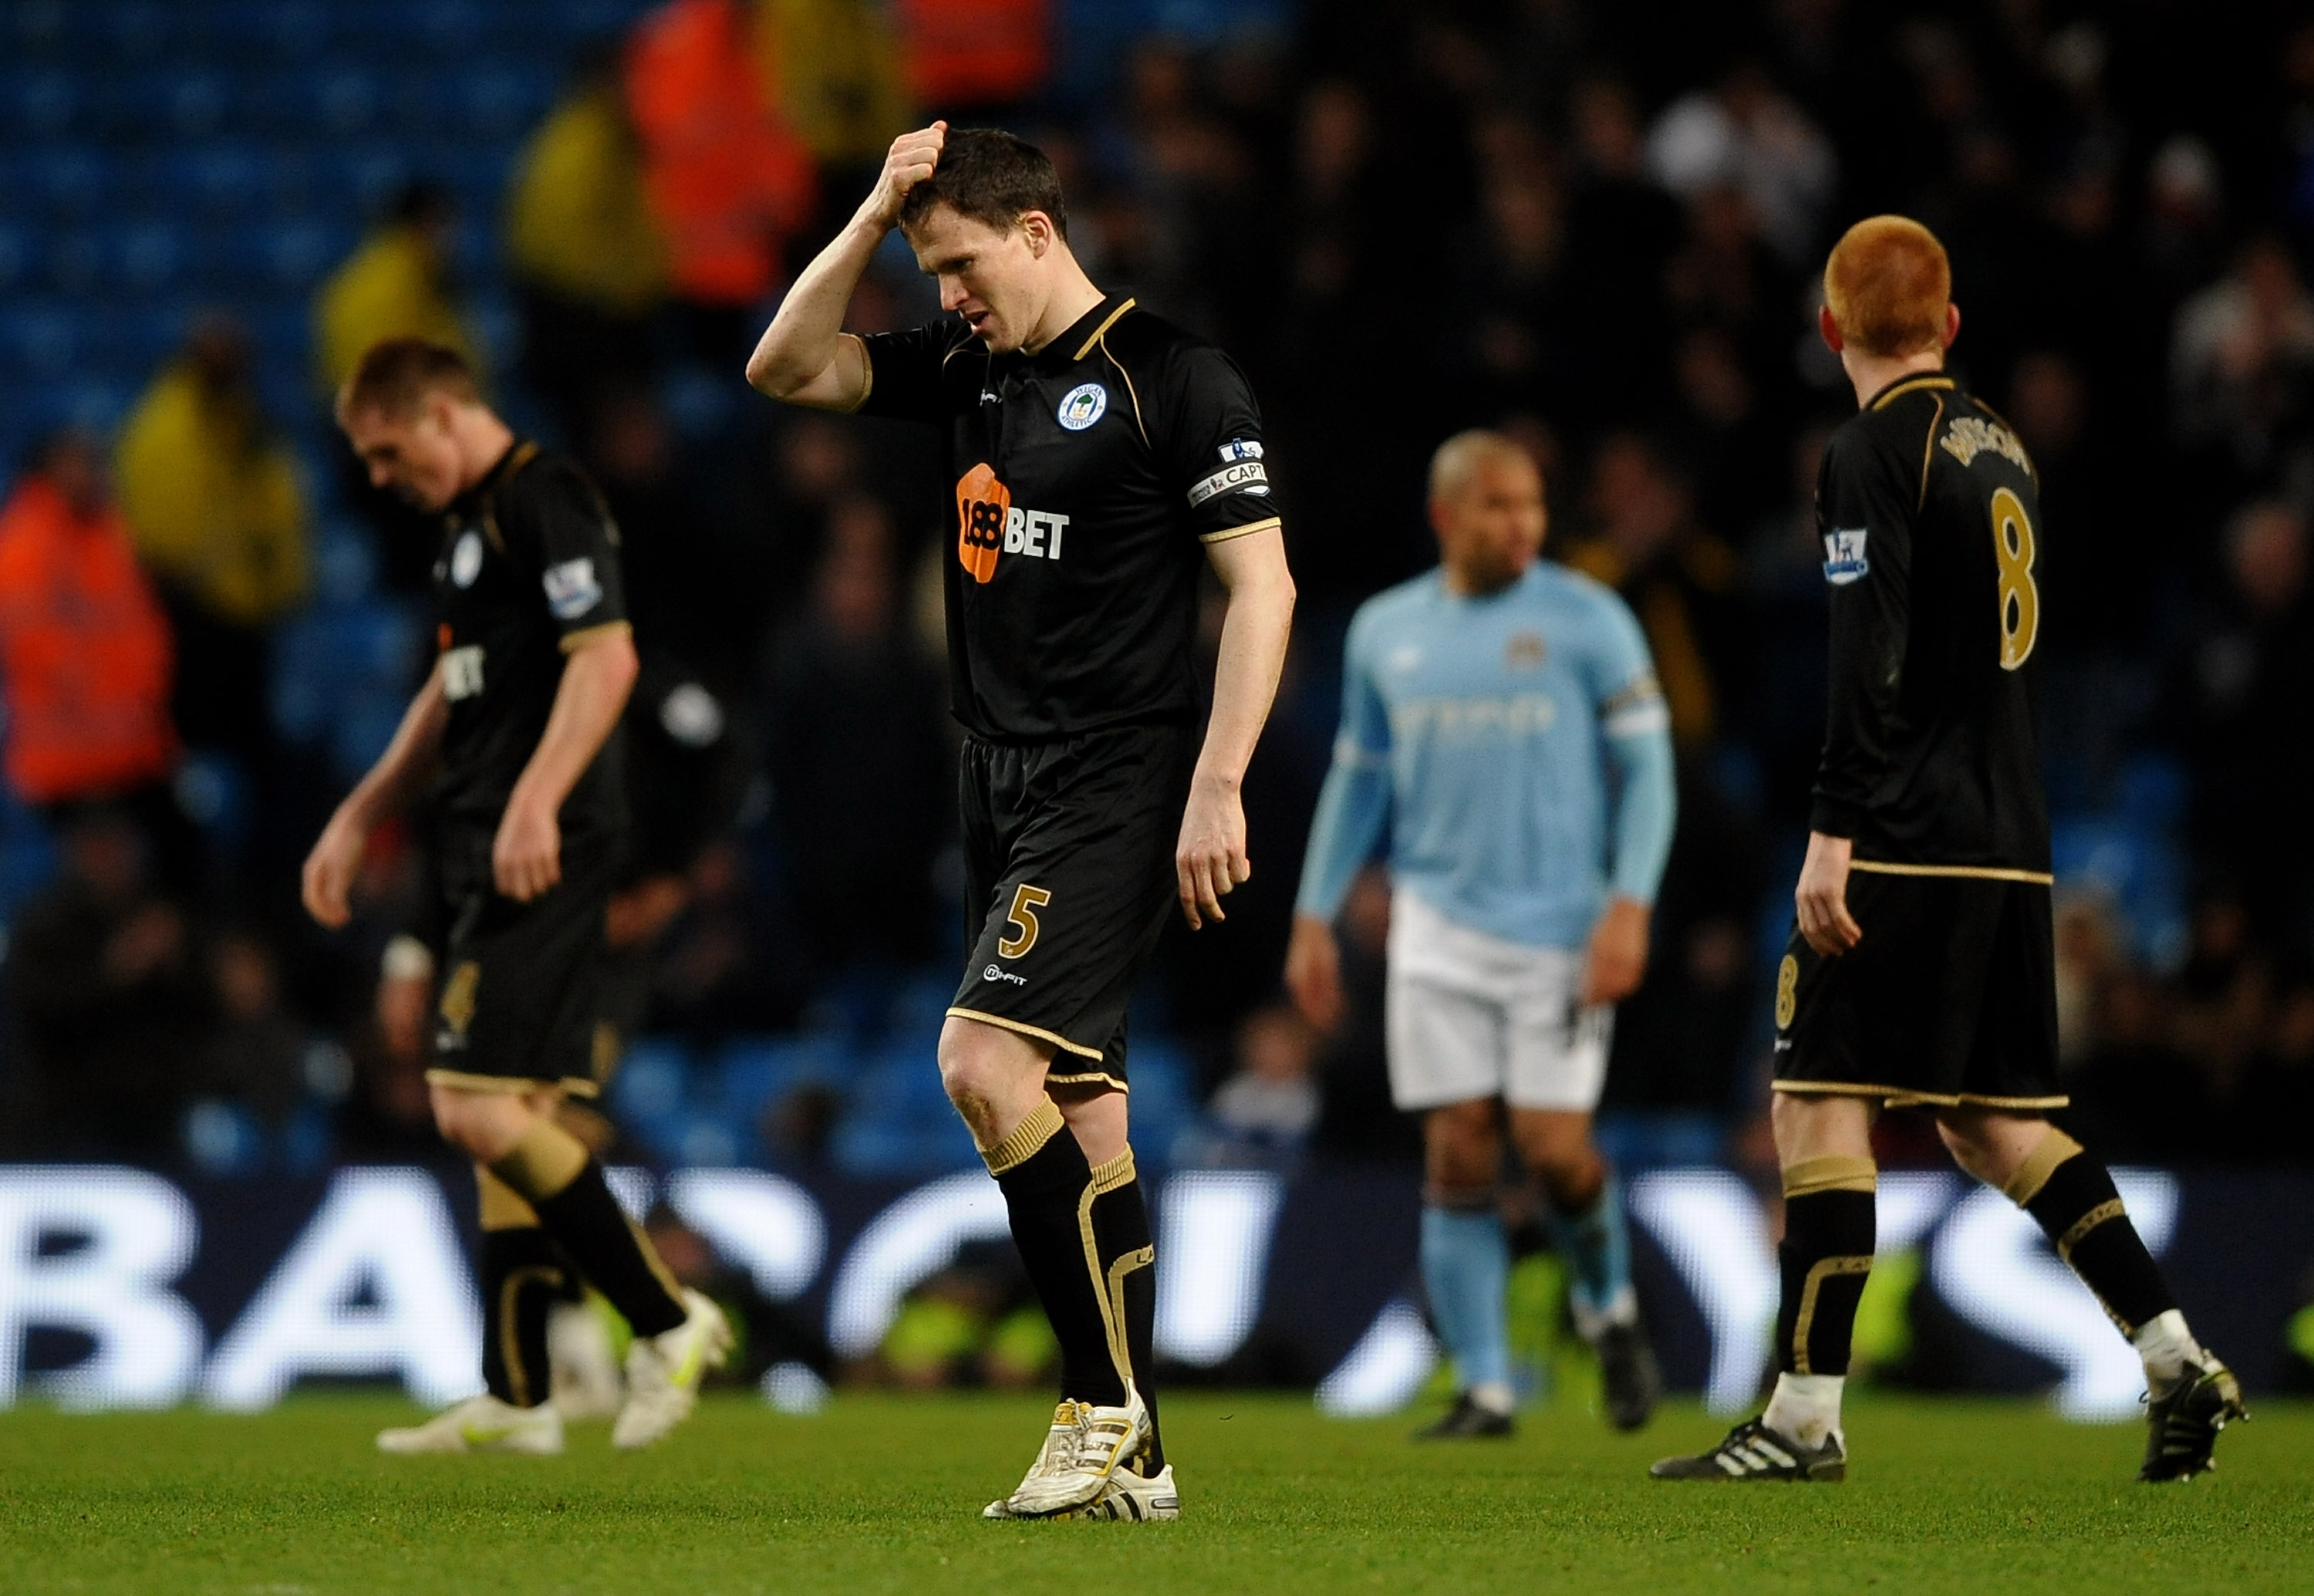 MANCHESTER, UNITED KINGDOM - MARCH 05:   Gary Caldwell of Wigan Athletic look dejected at the end of the Barclays Premier League match between Manchester City and Wigan Athletic at the City of Manchester Stadium on March 5, 2011 in Manchester, England. (P